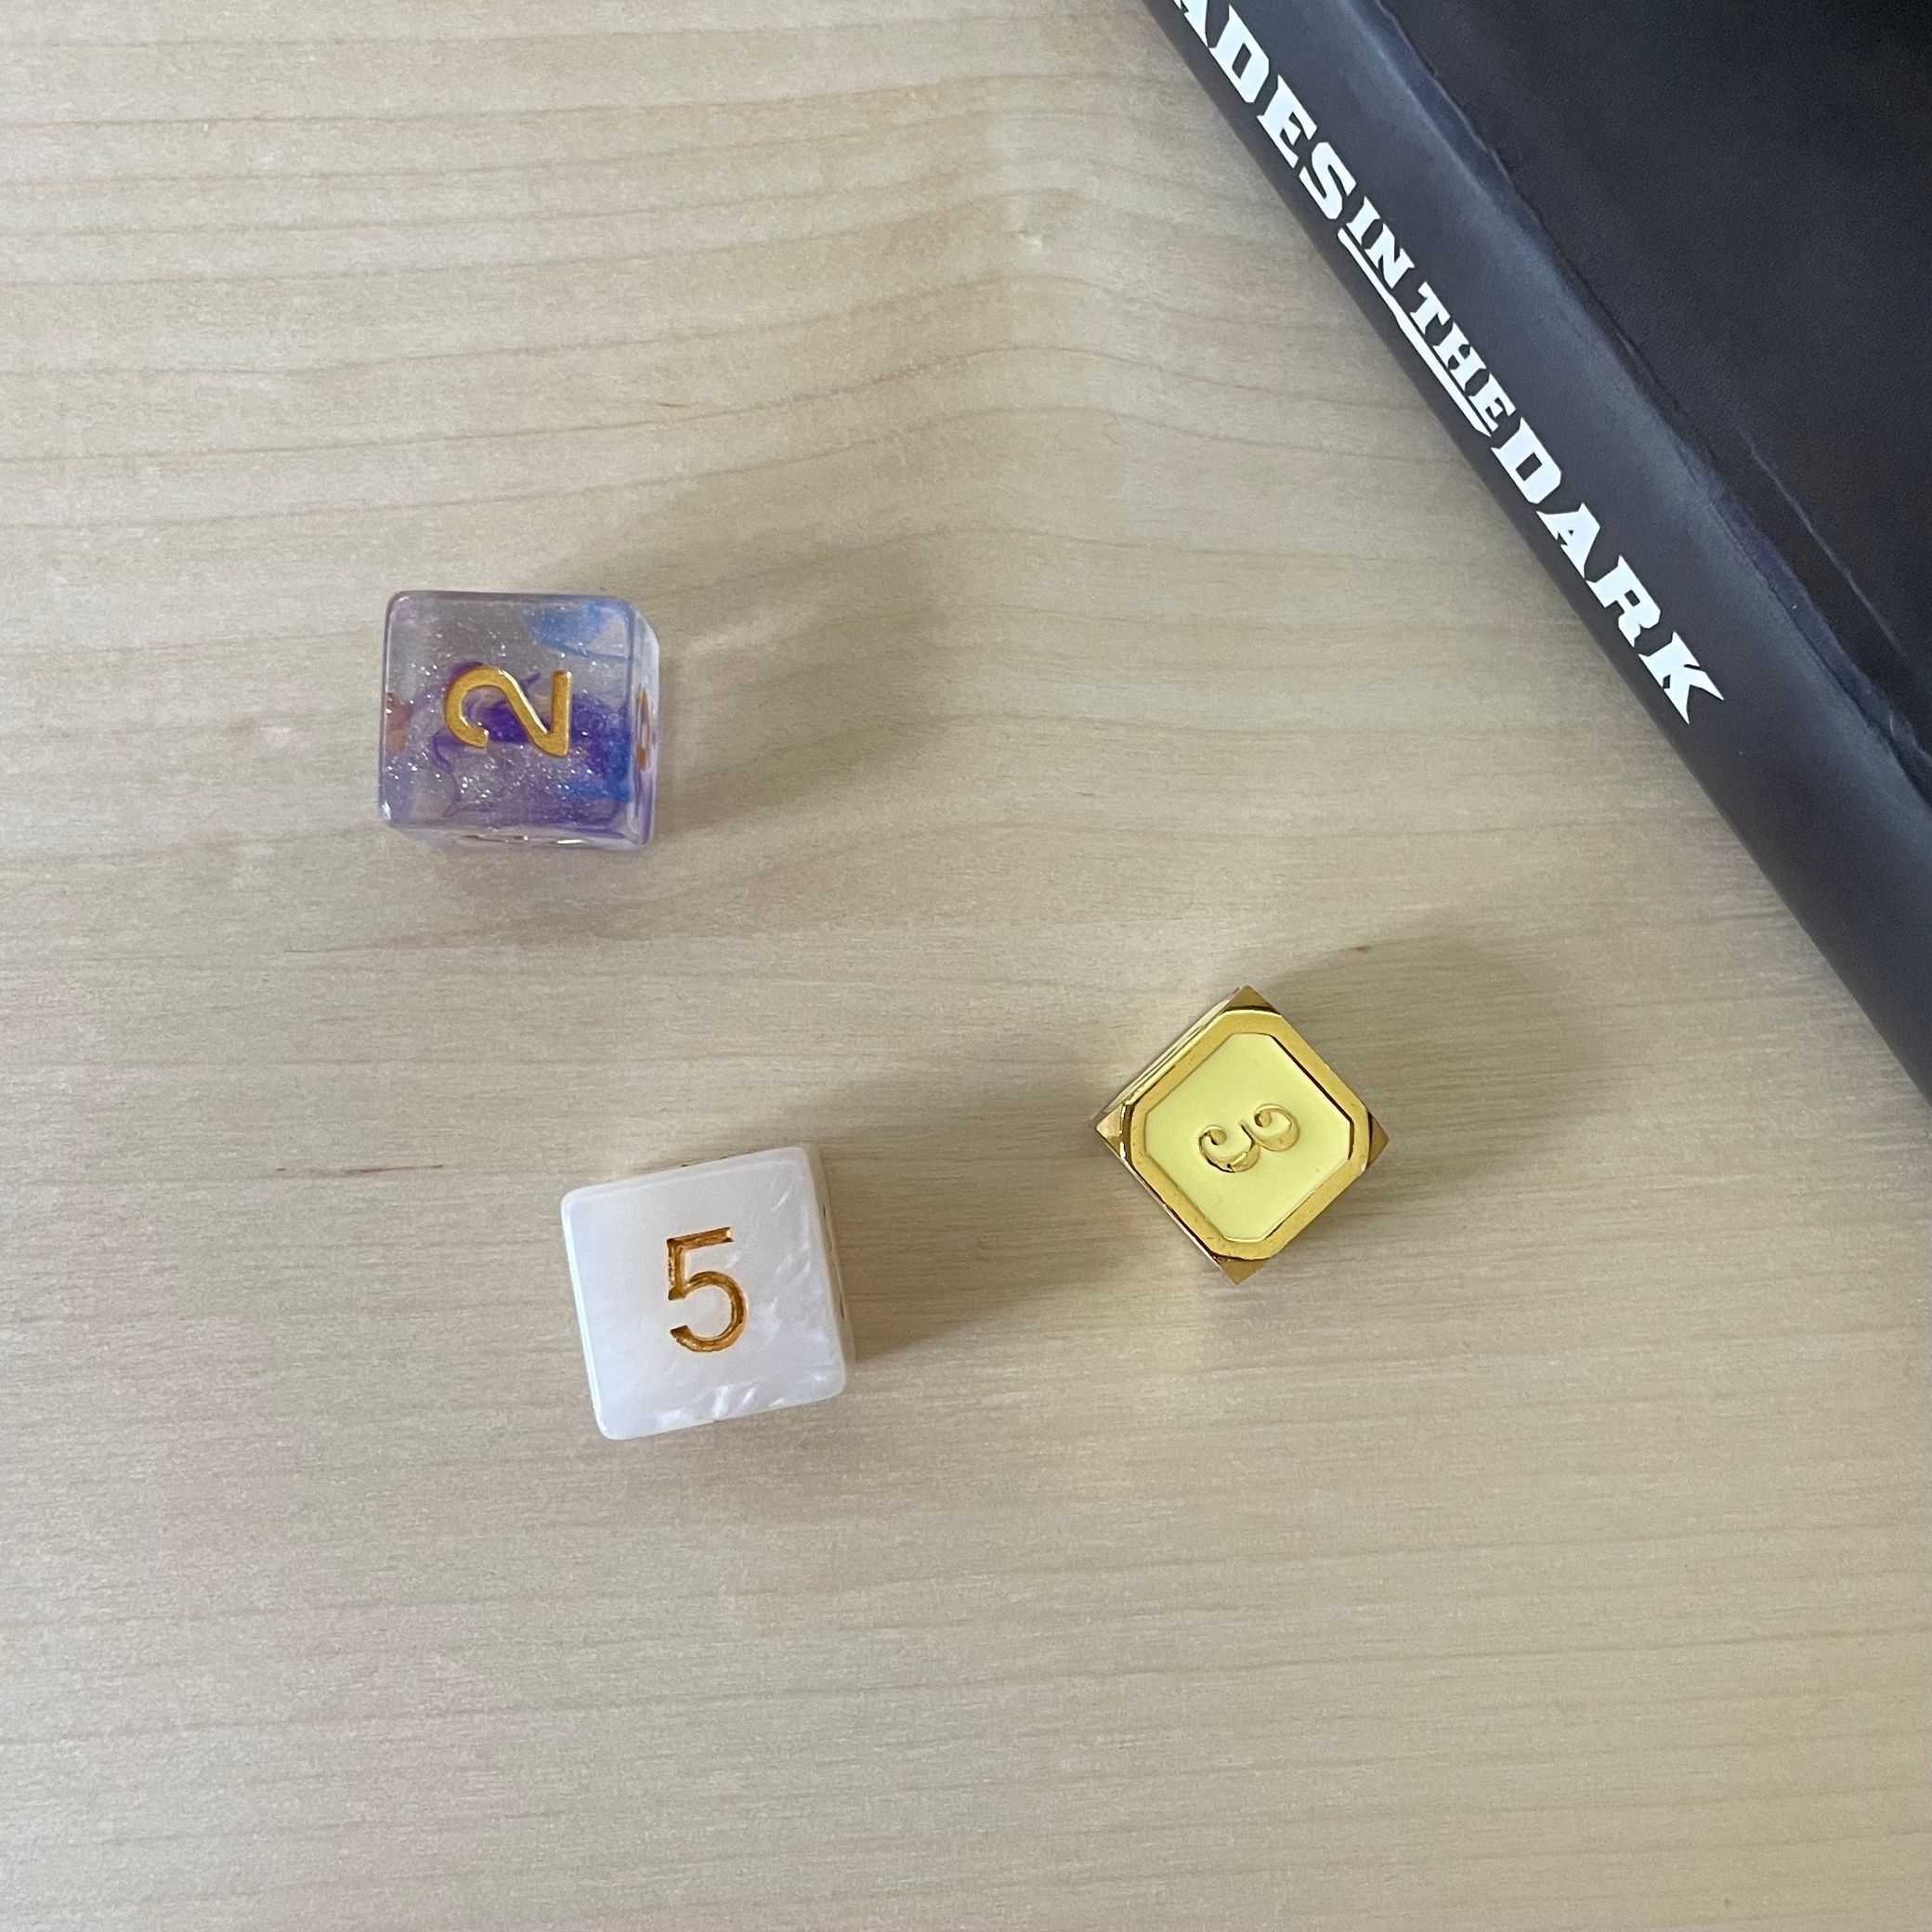 Example roll of the dice